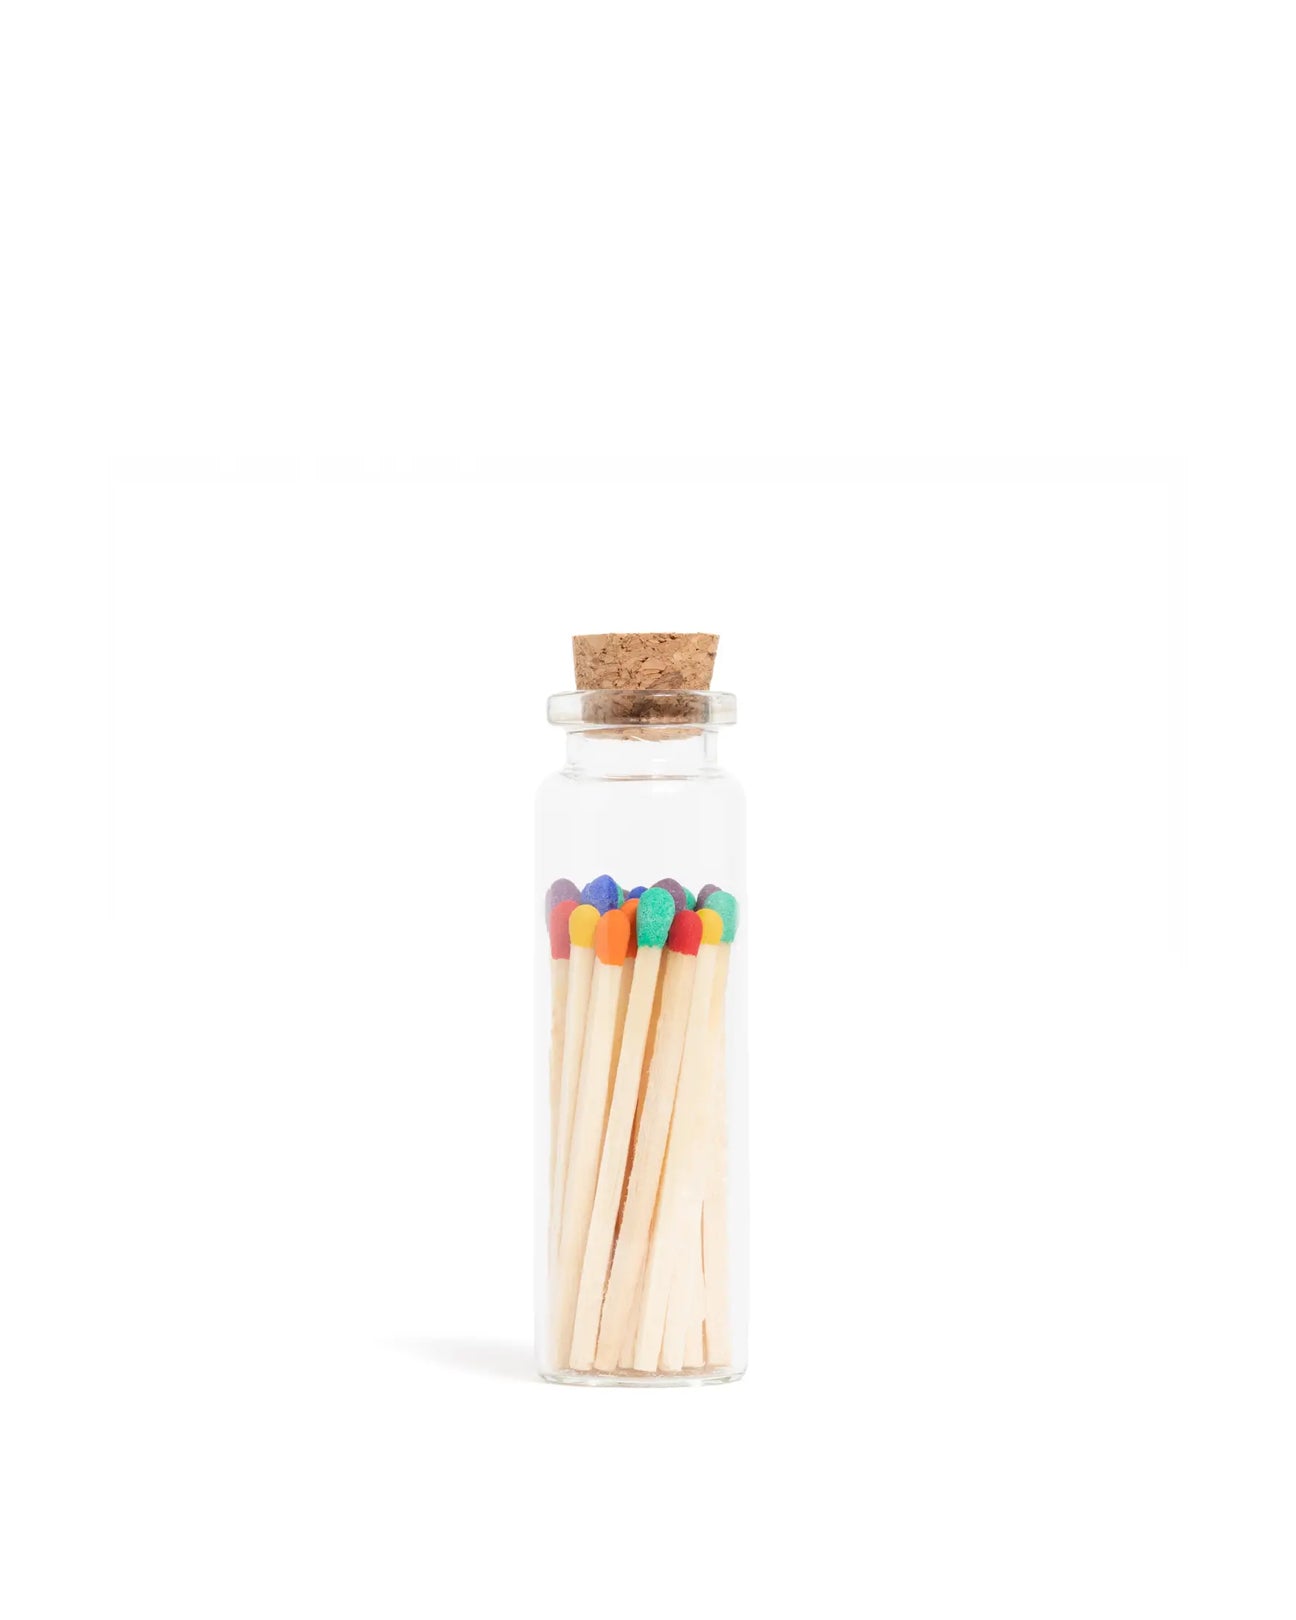 9 CHRISTOPHER Colored Matches in Corked Glass Vial